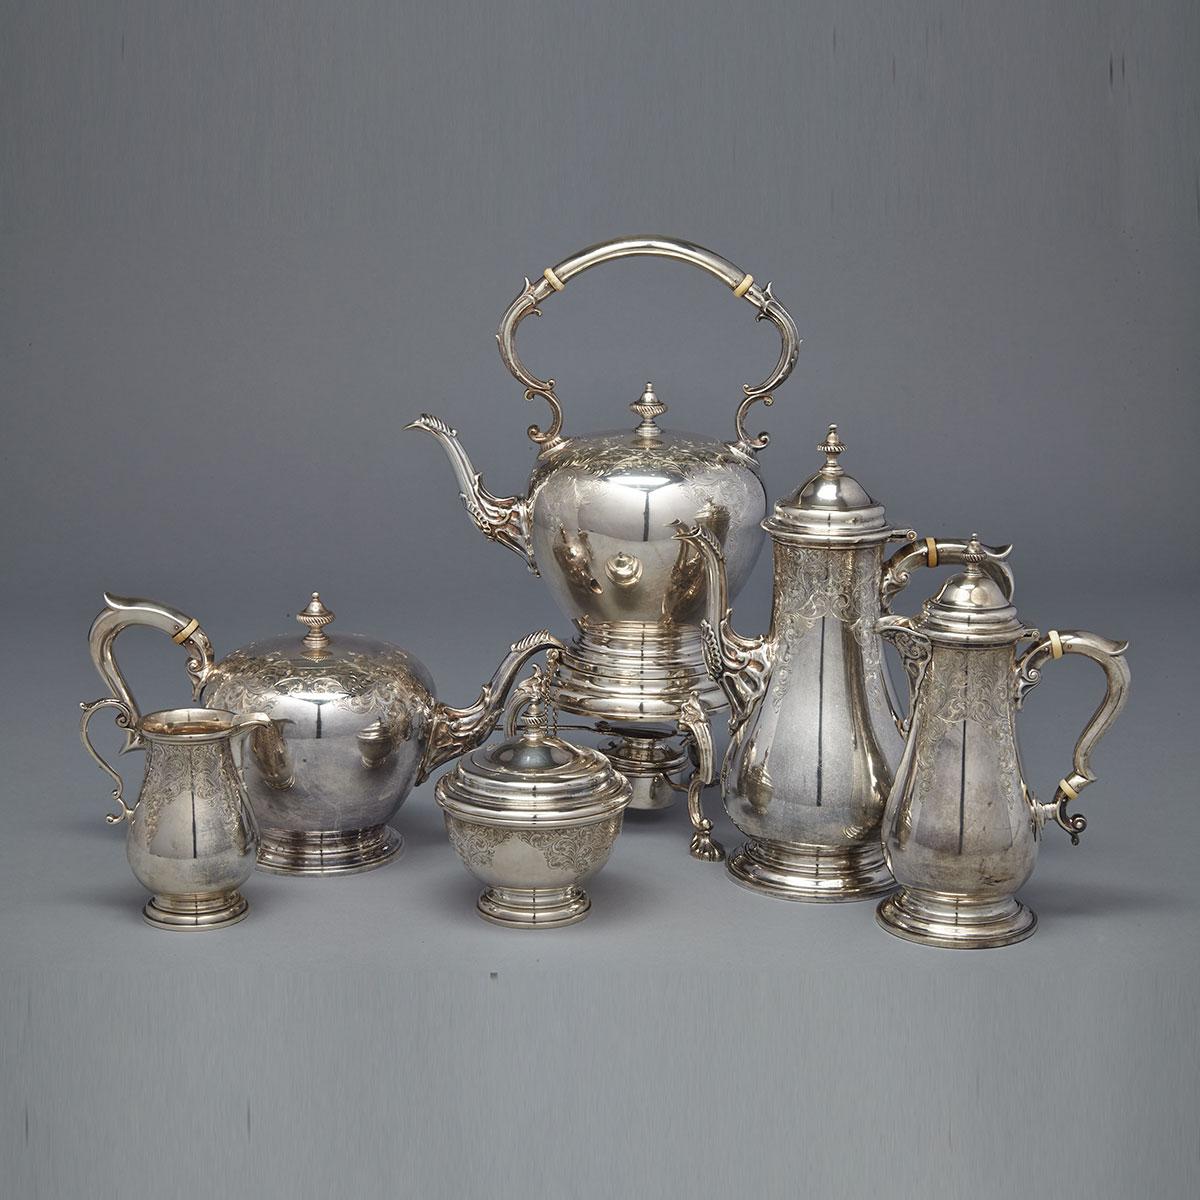 Canadian SIlver Tea and Coffee Service, Henry Birks & Sons, Montreal, Que., 1958-63